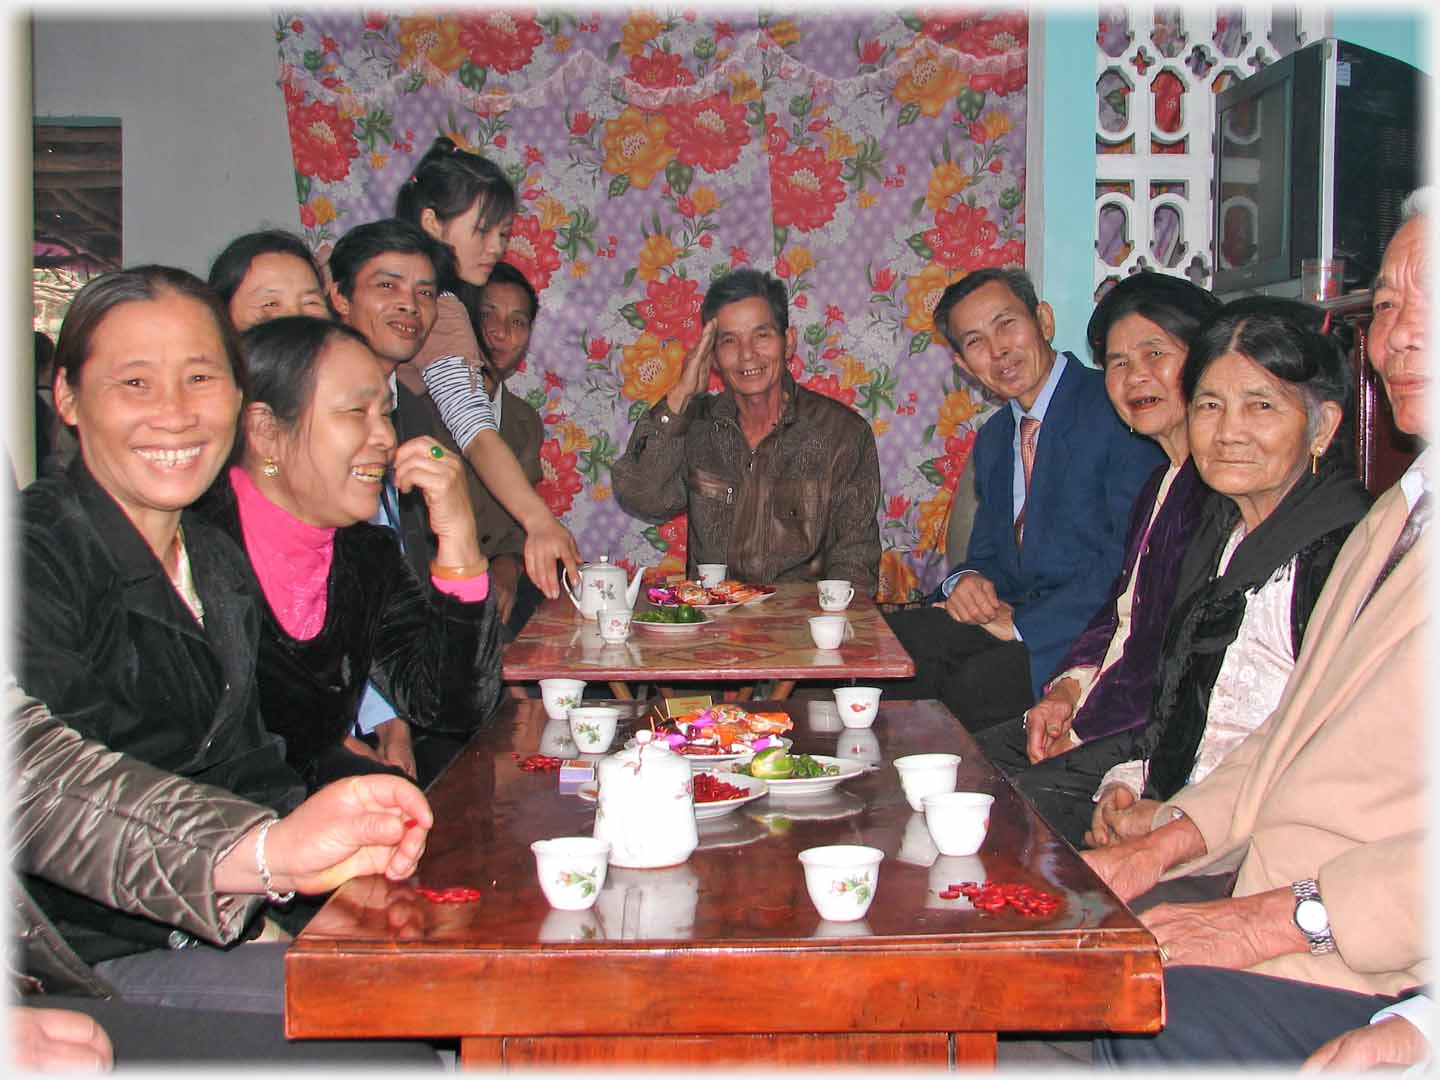 Group sitting on either side of reception table in house with tea cups.